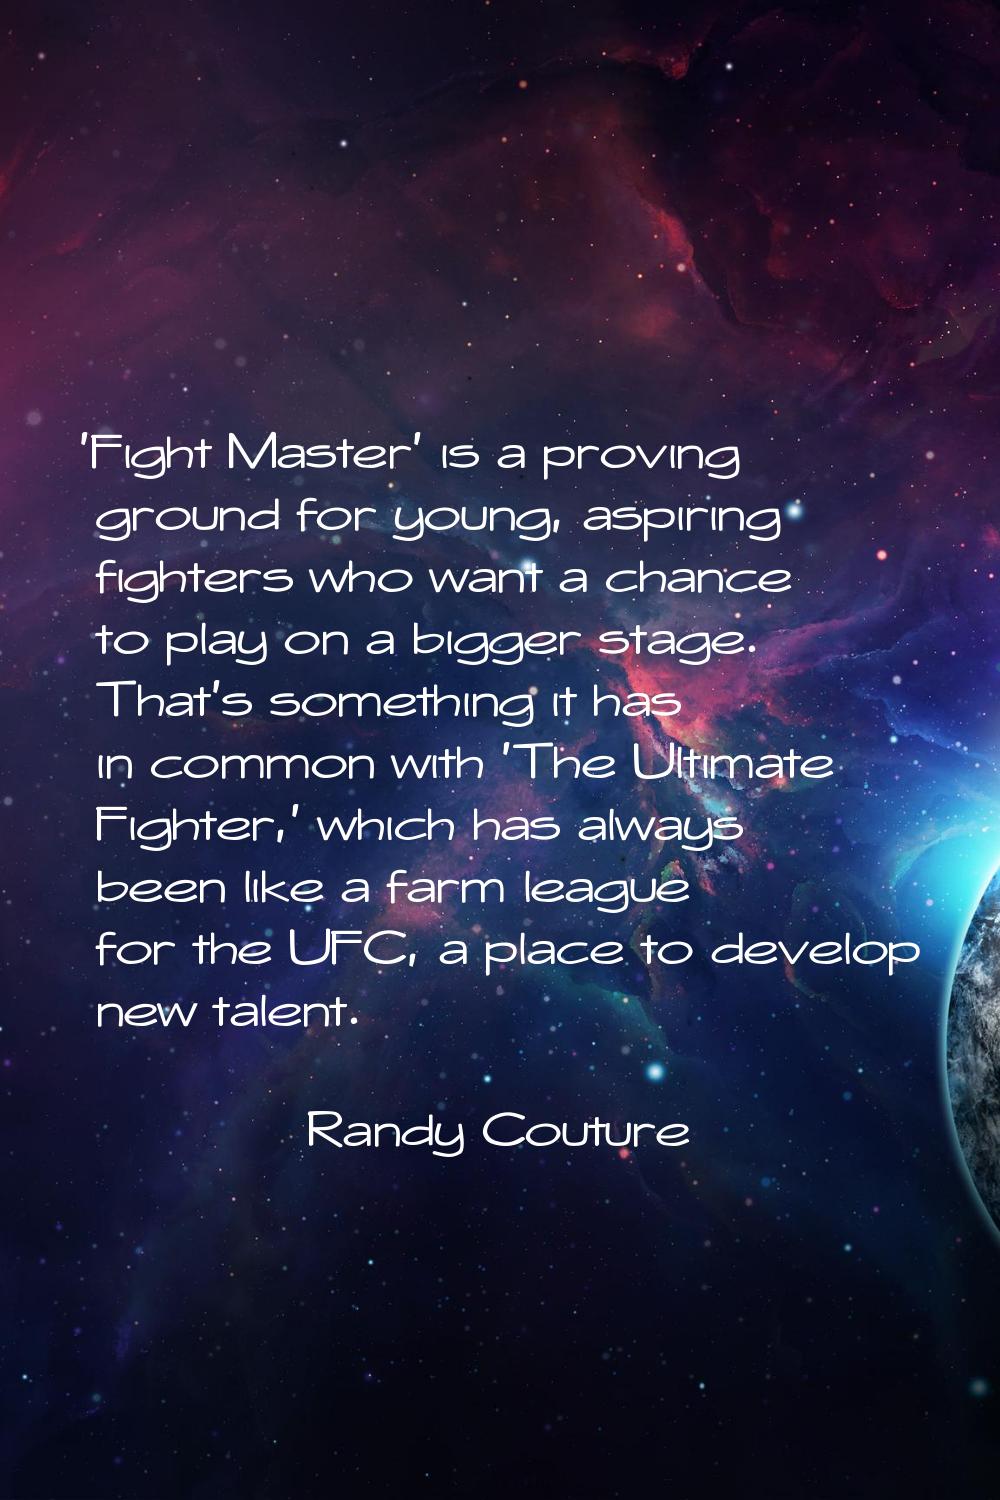 'Fight Master' is a proving ground for young, aspiring fighters who want a chance to play on a bigg